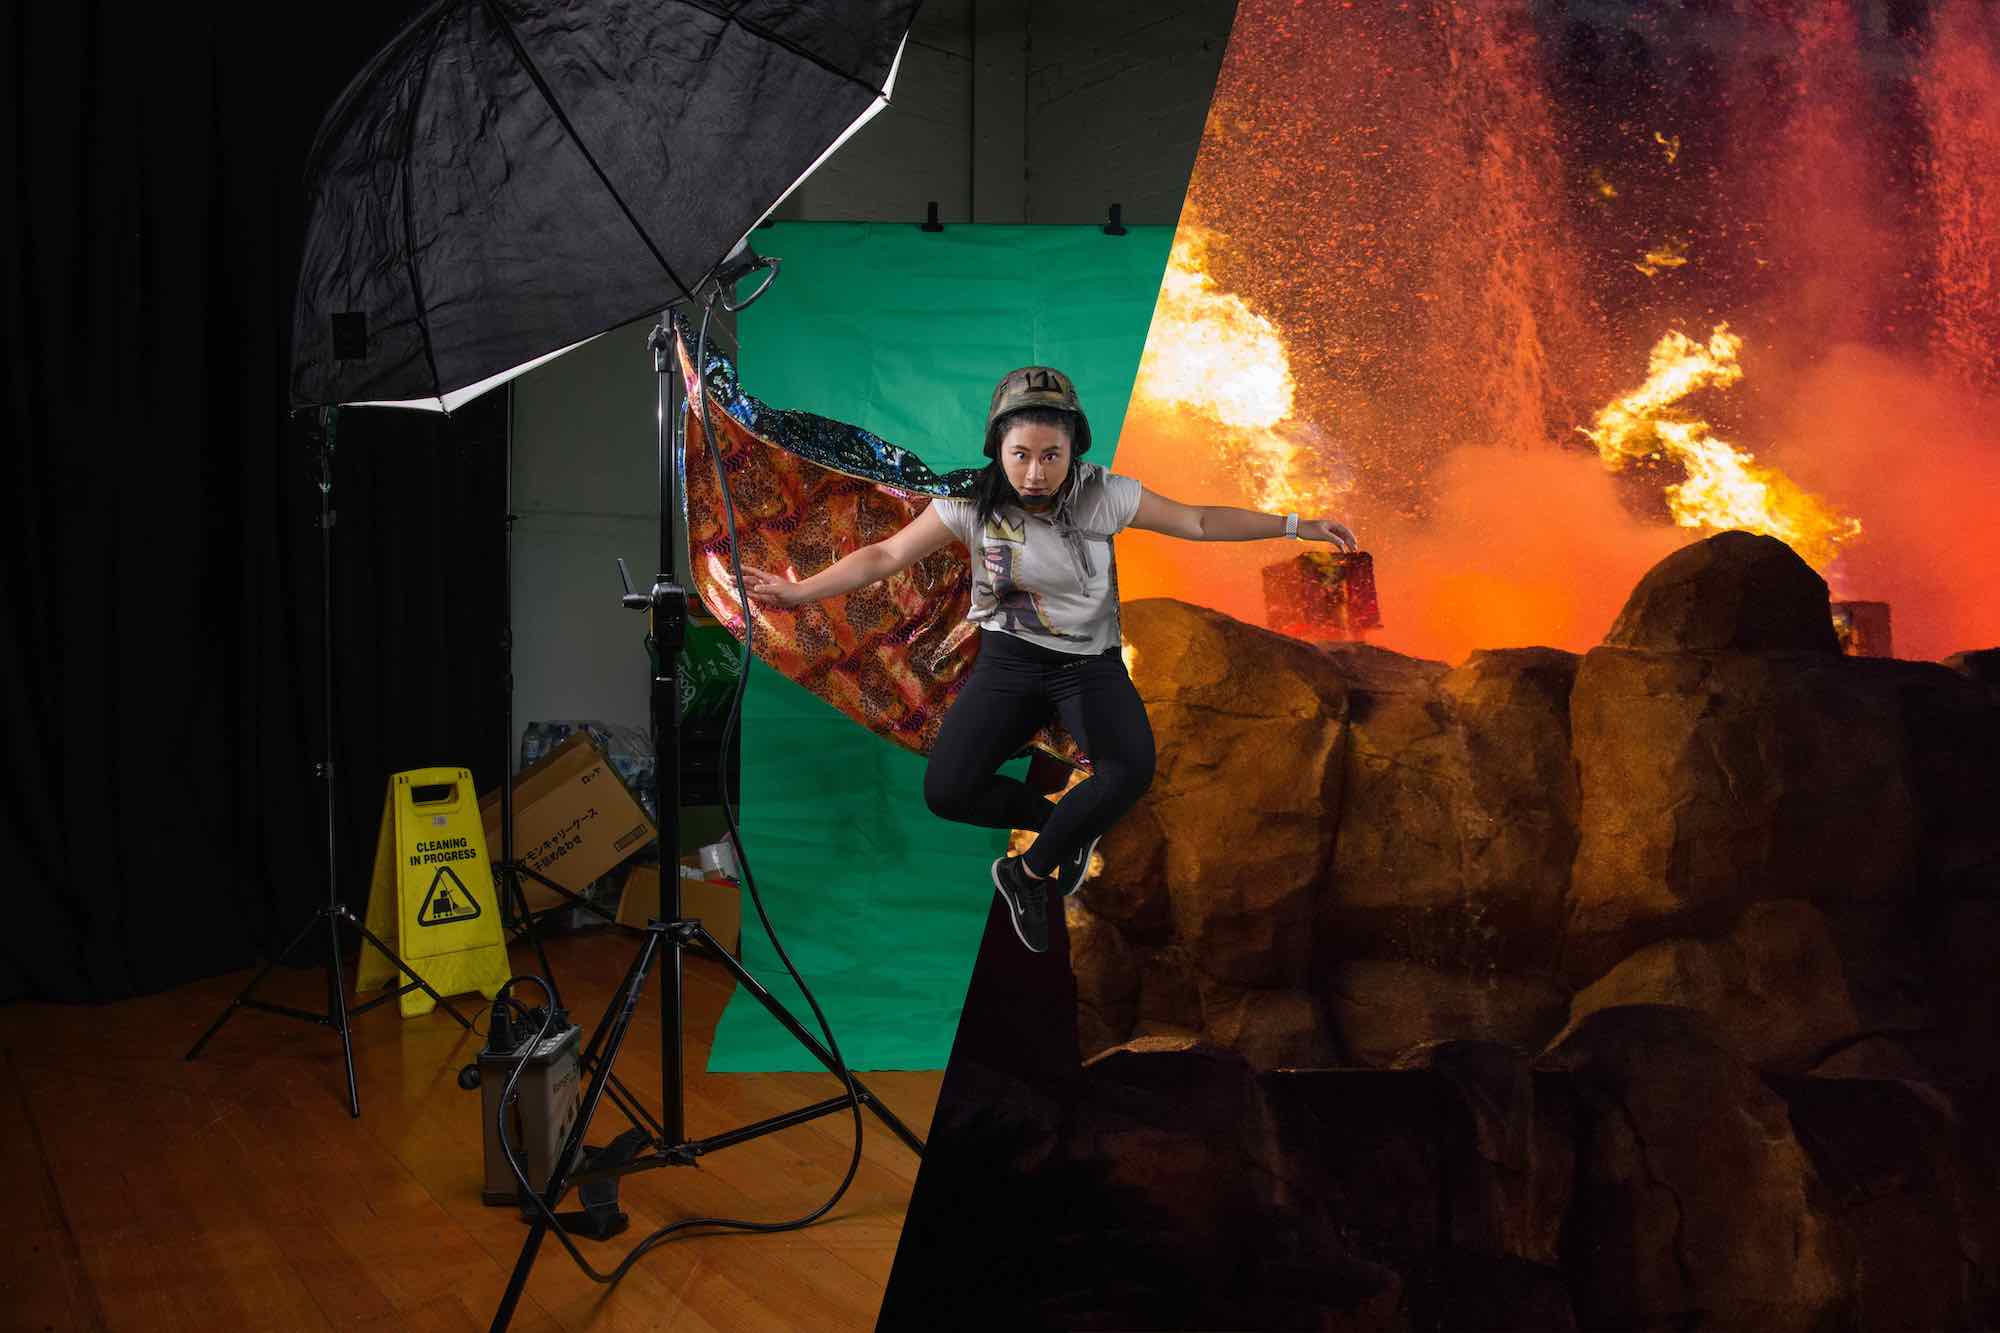 A person is centre-frame, mid-air, with a green screen on the left and explosions on the right